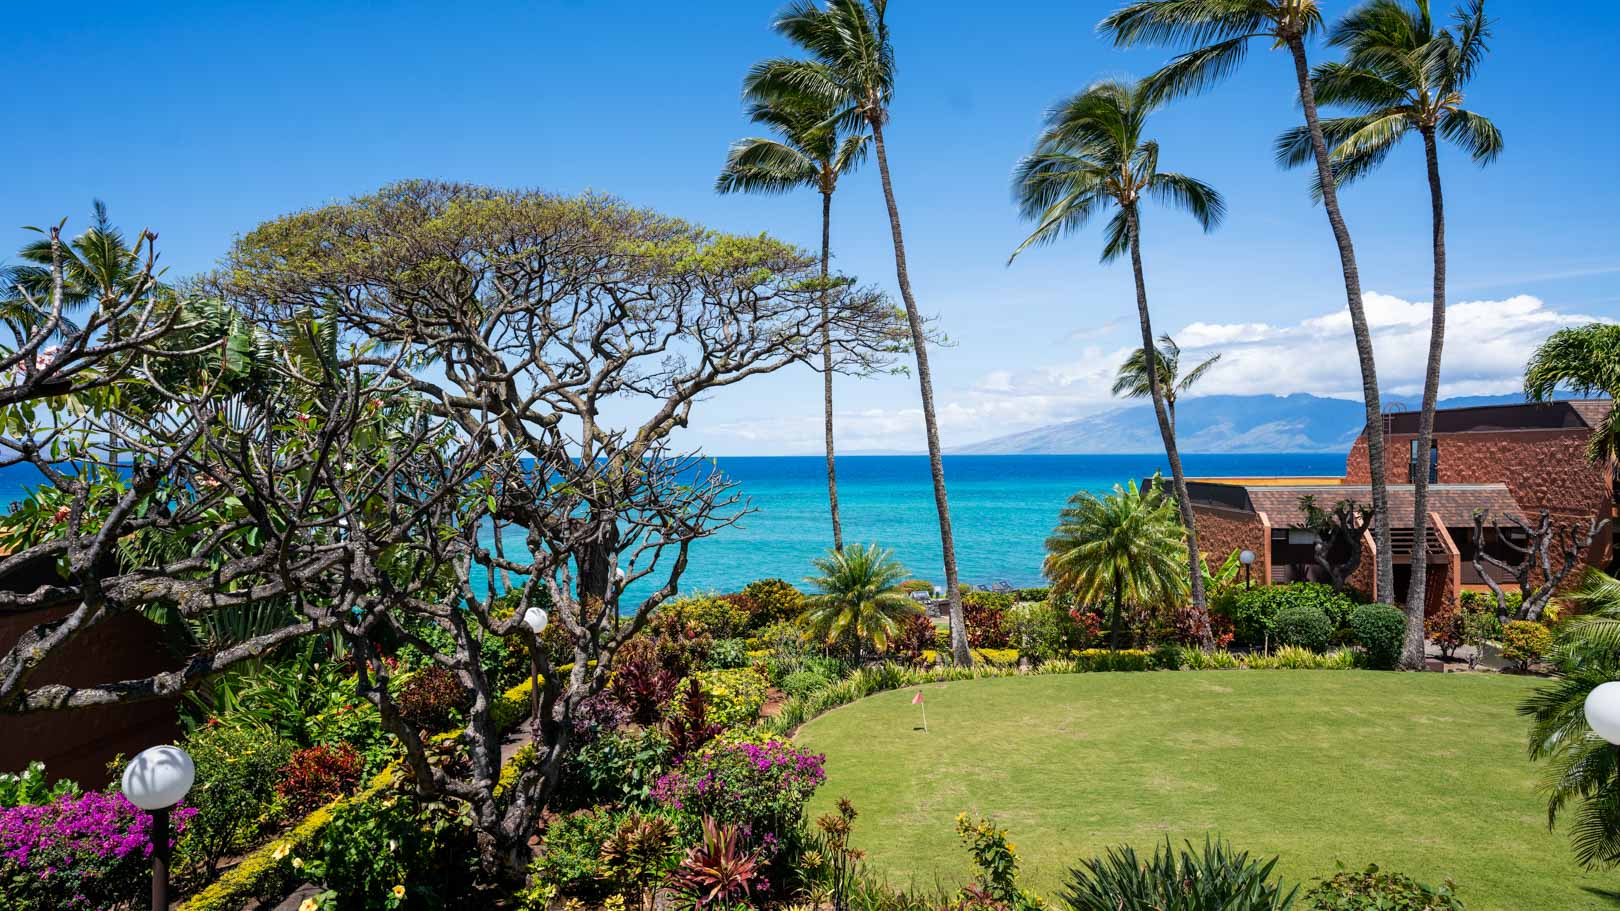 A scenic view of the blue ocean at VRI's Kuleana Club in Maui, Hawaii.